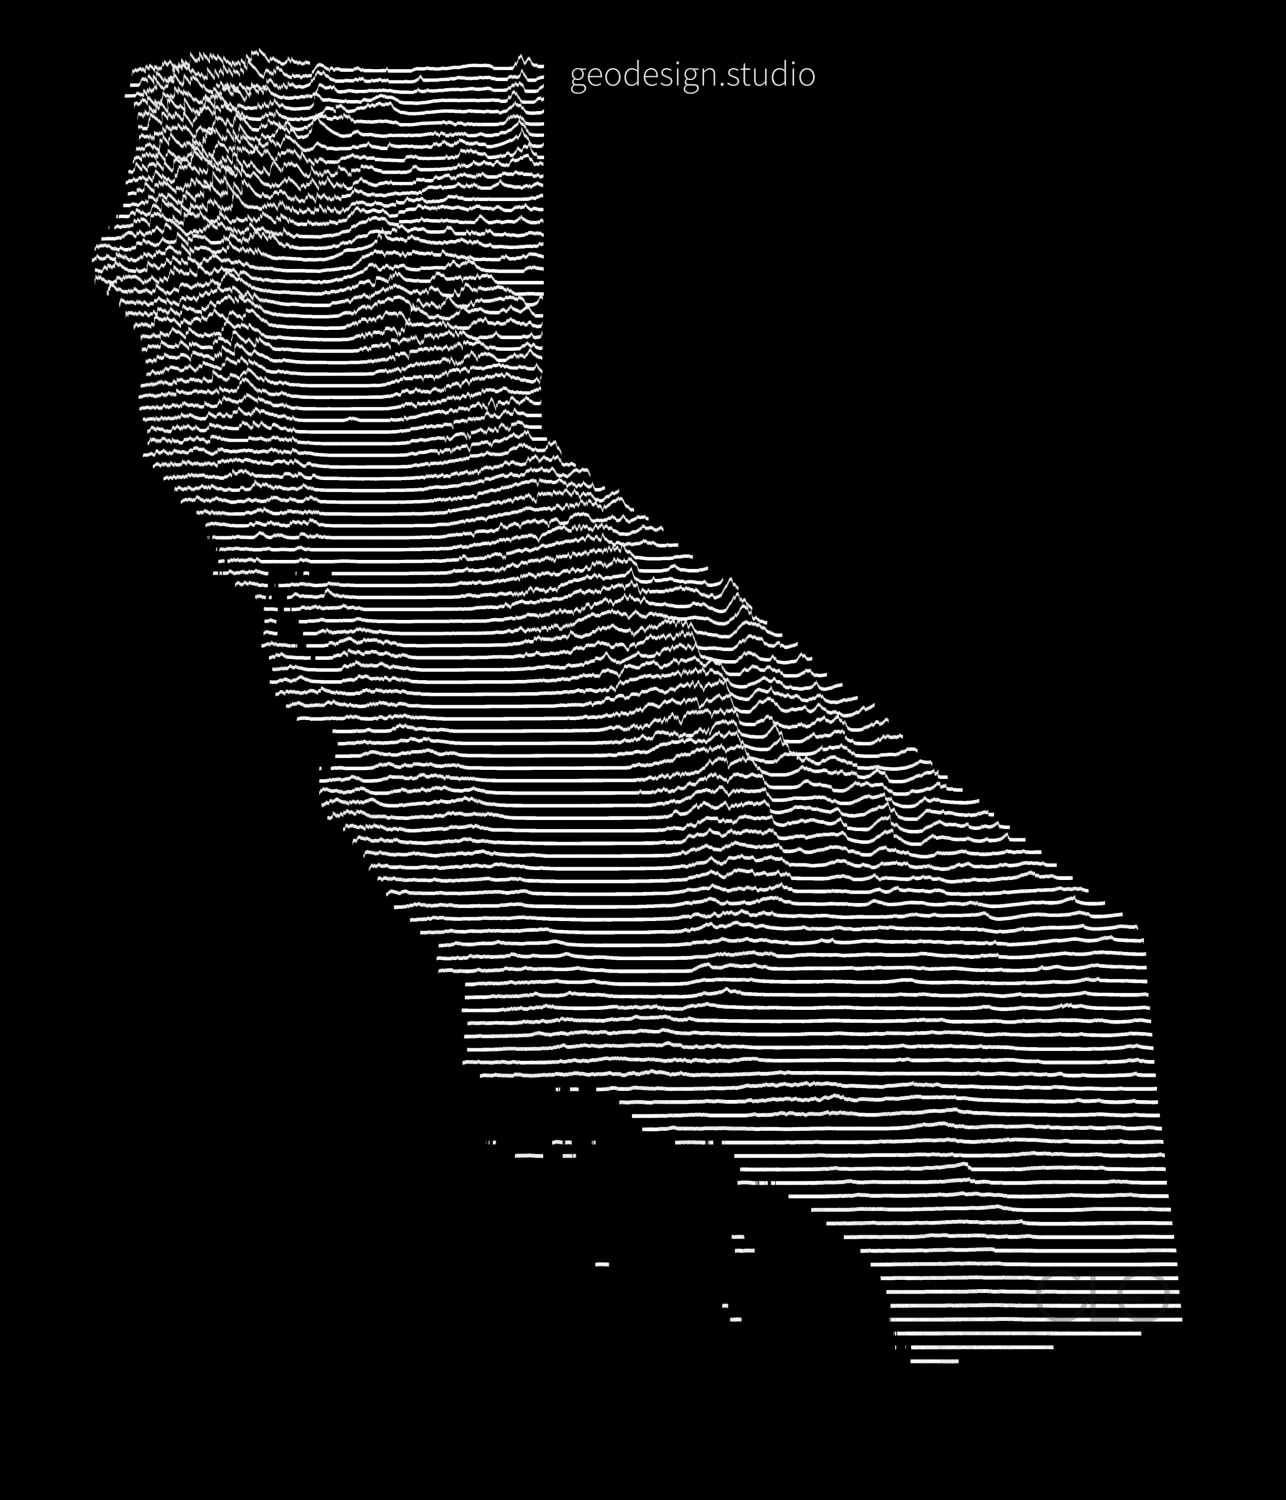 California elevation map (in Joy Division style)